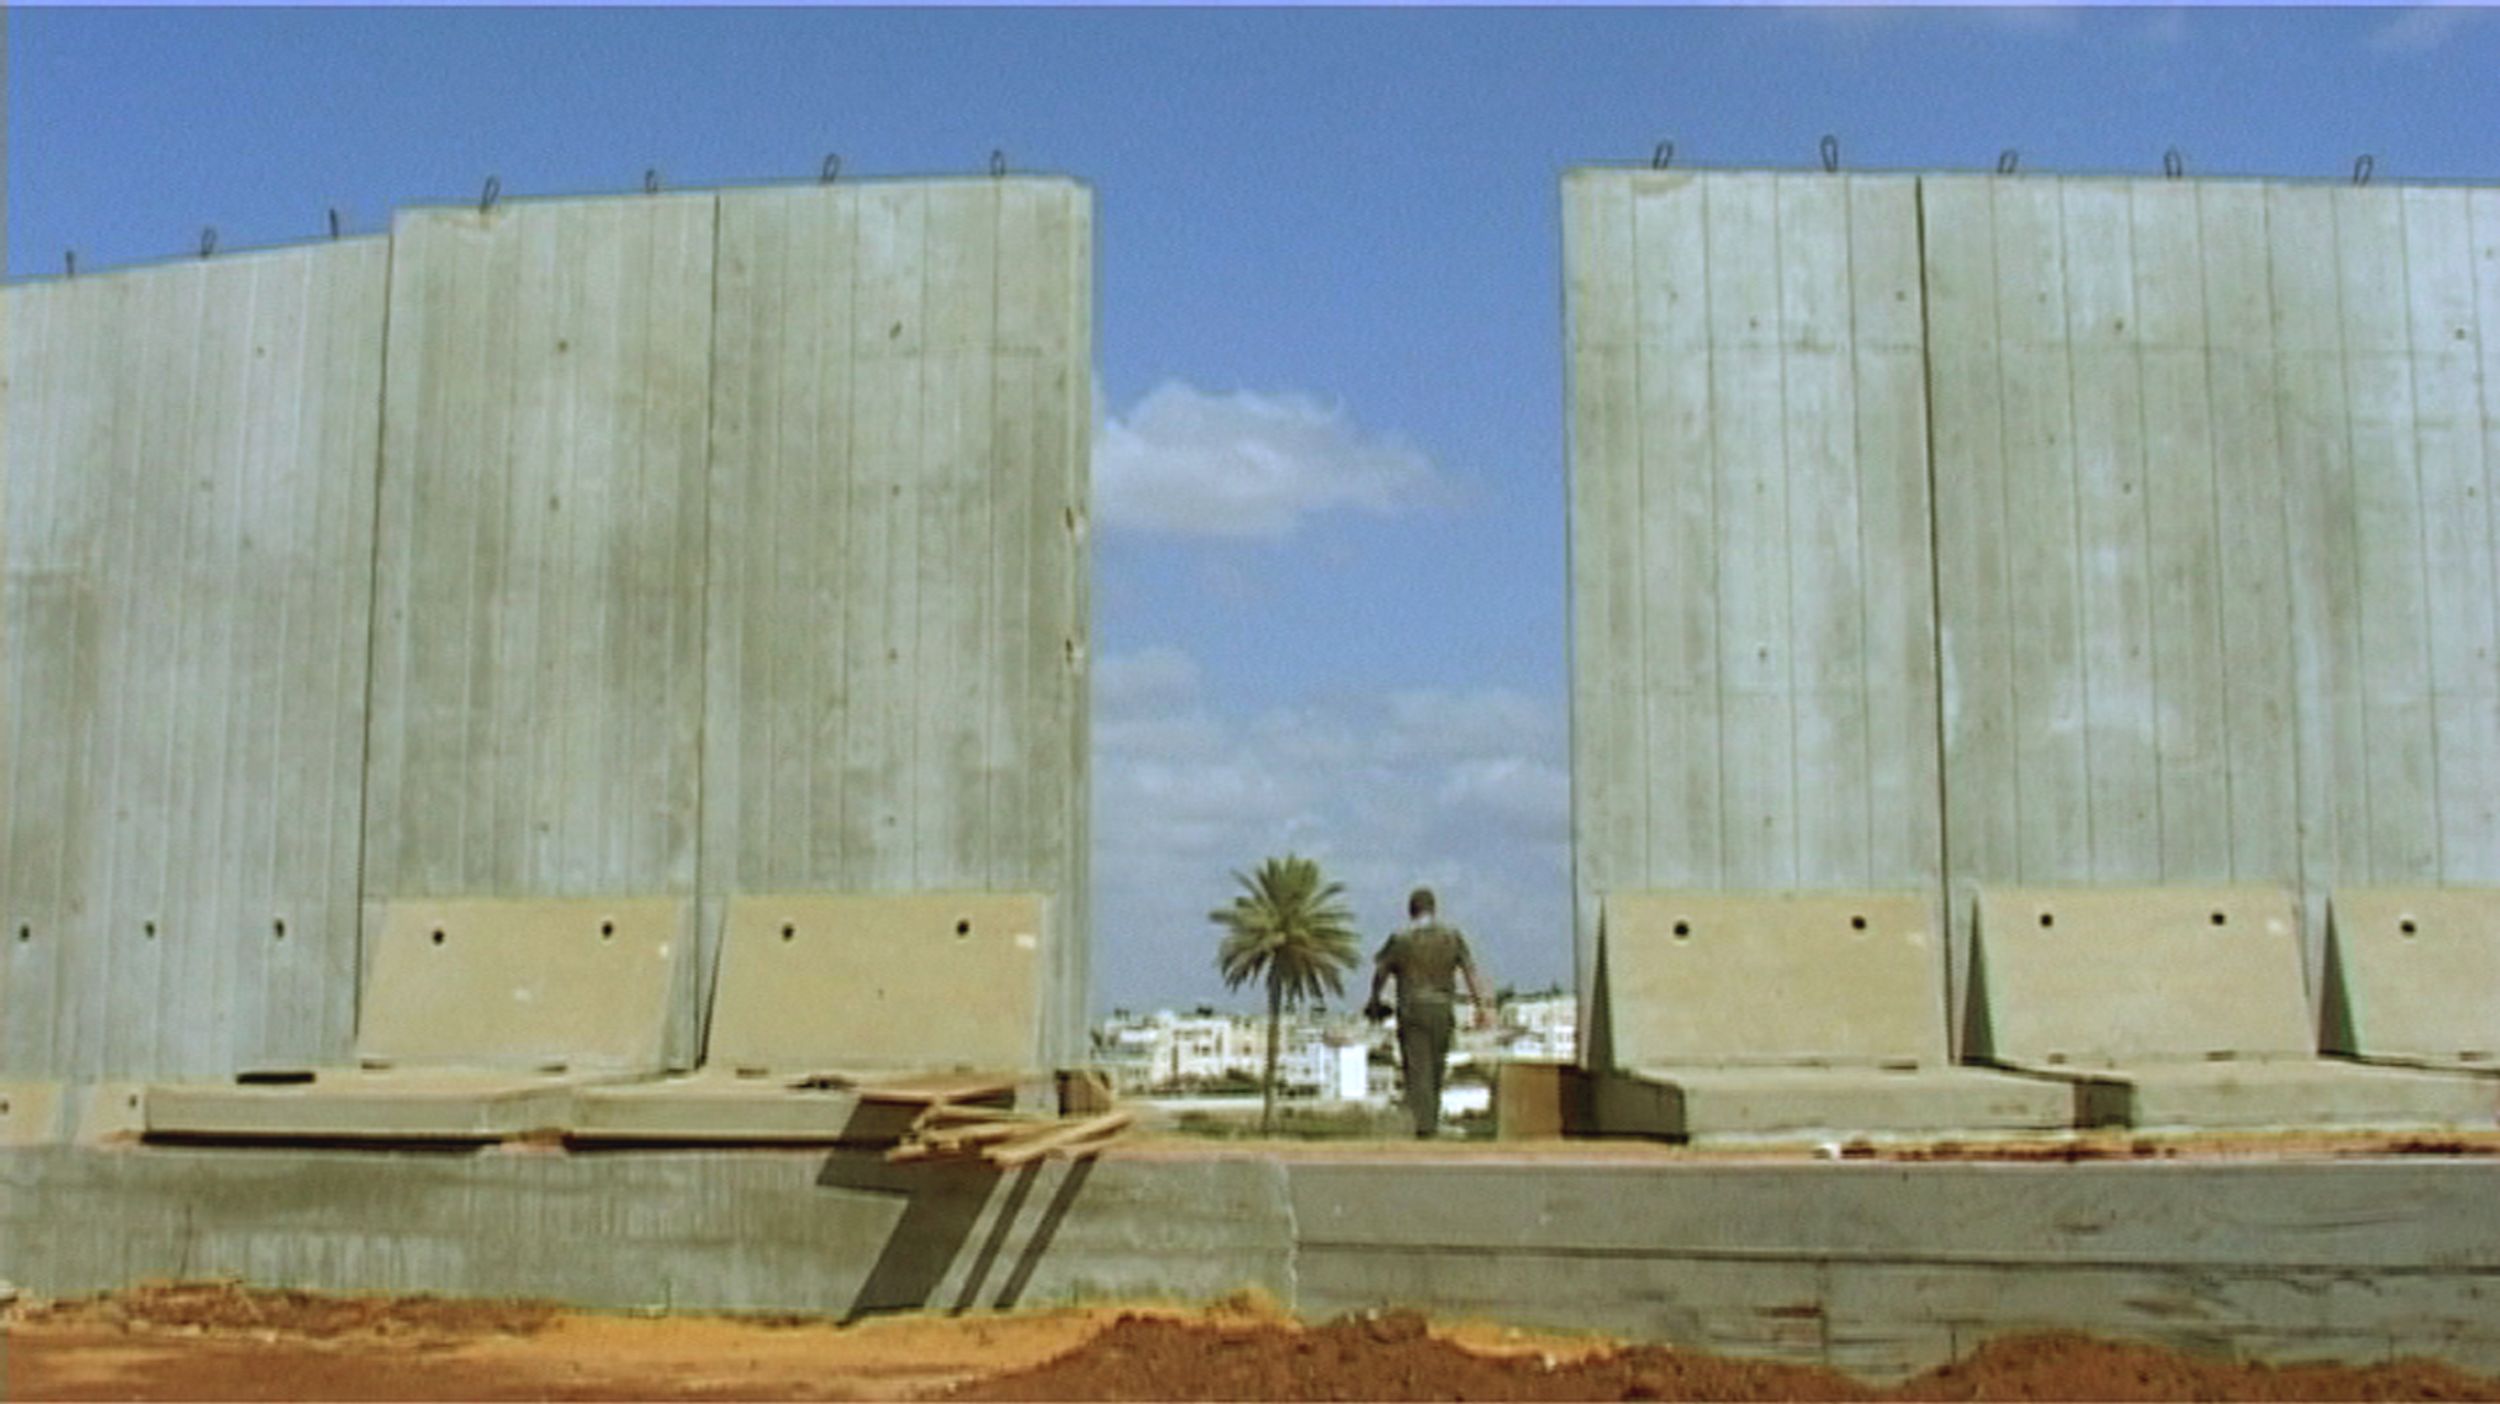 Route 181, Fragments of a Journey in Palestine-Israel